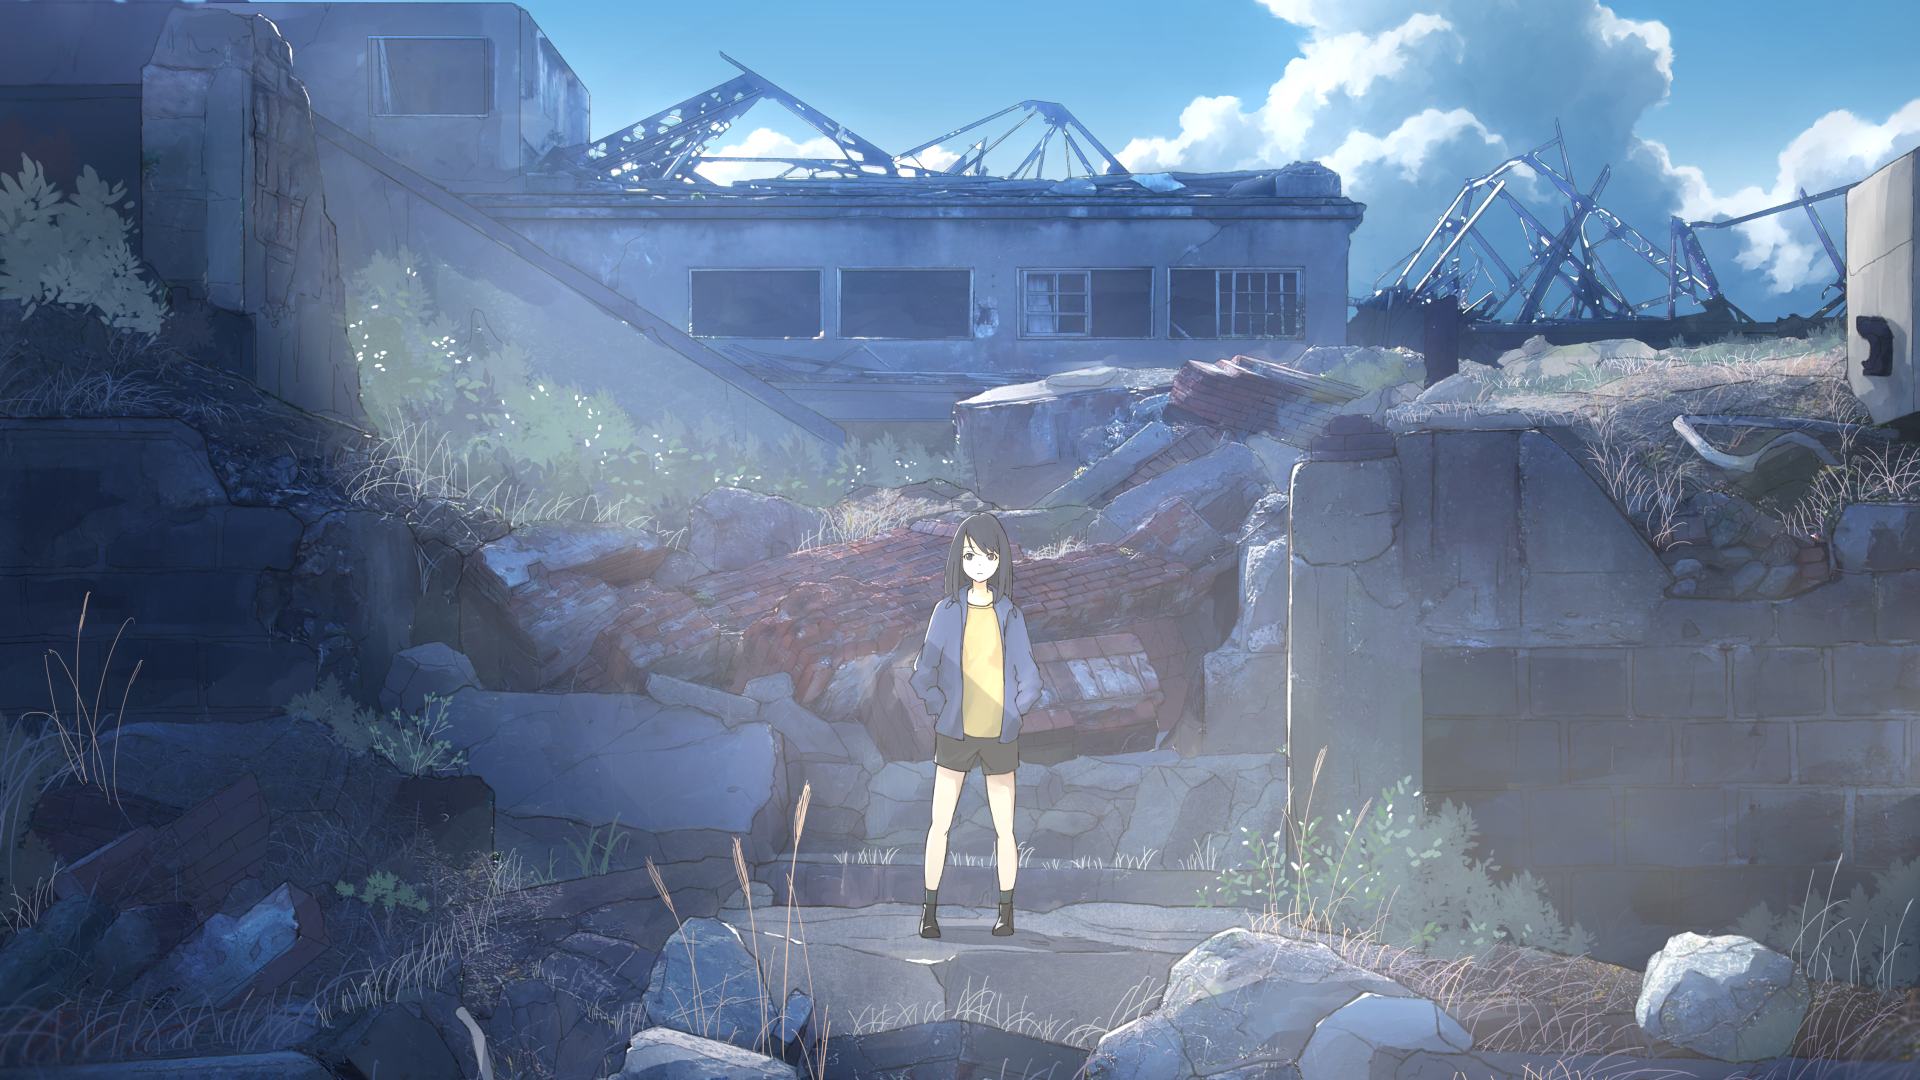 Anime 1920x1080 anime urban decay Skybase anime girls looking at viewer clouds hands in pockets sky rocks sunlight grass standing long hair building open jacket jacket debris shorts outdoors women outdoors